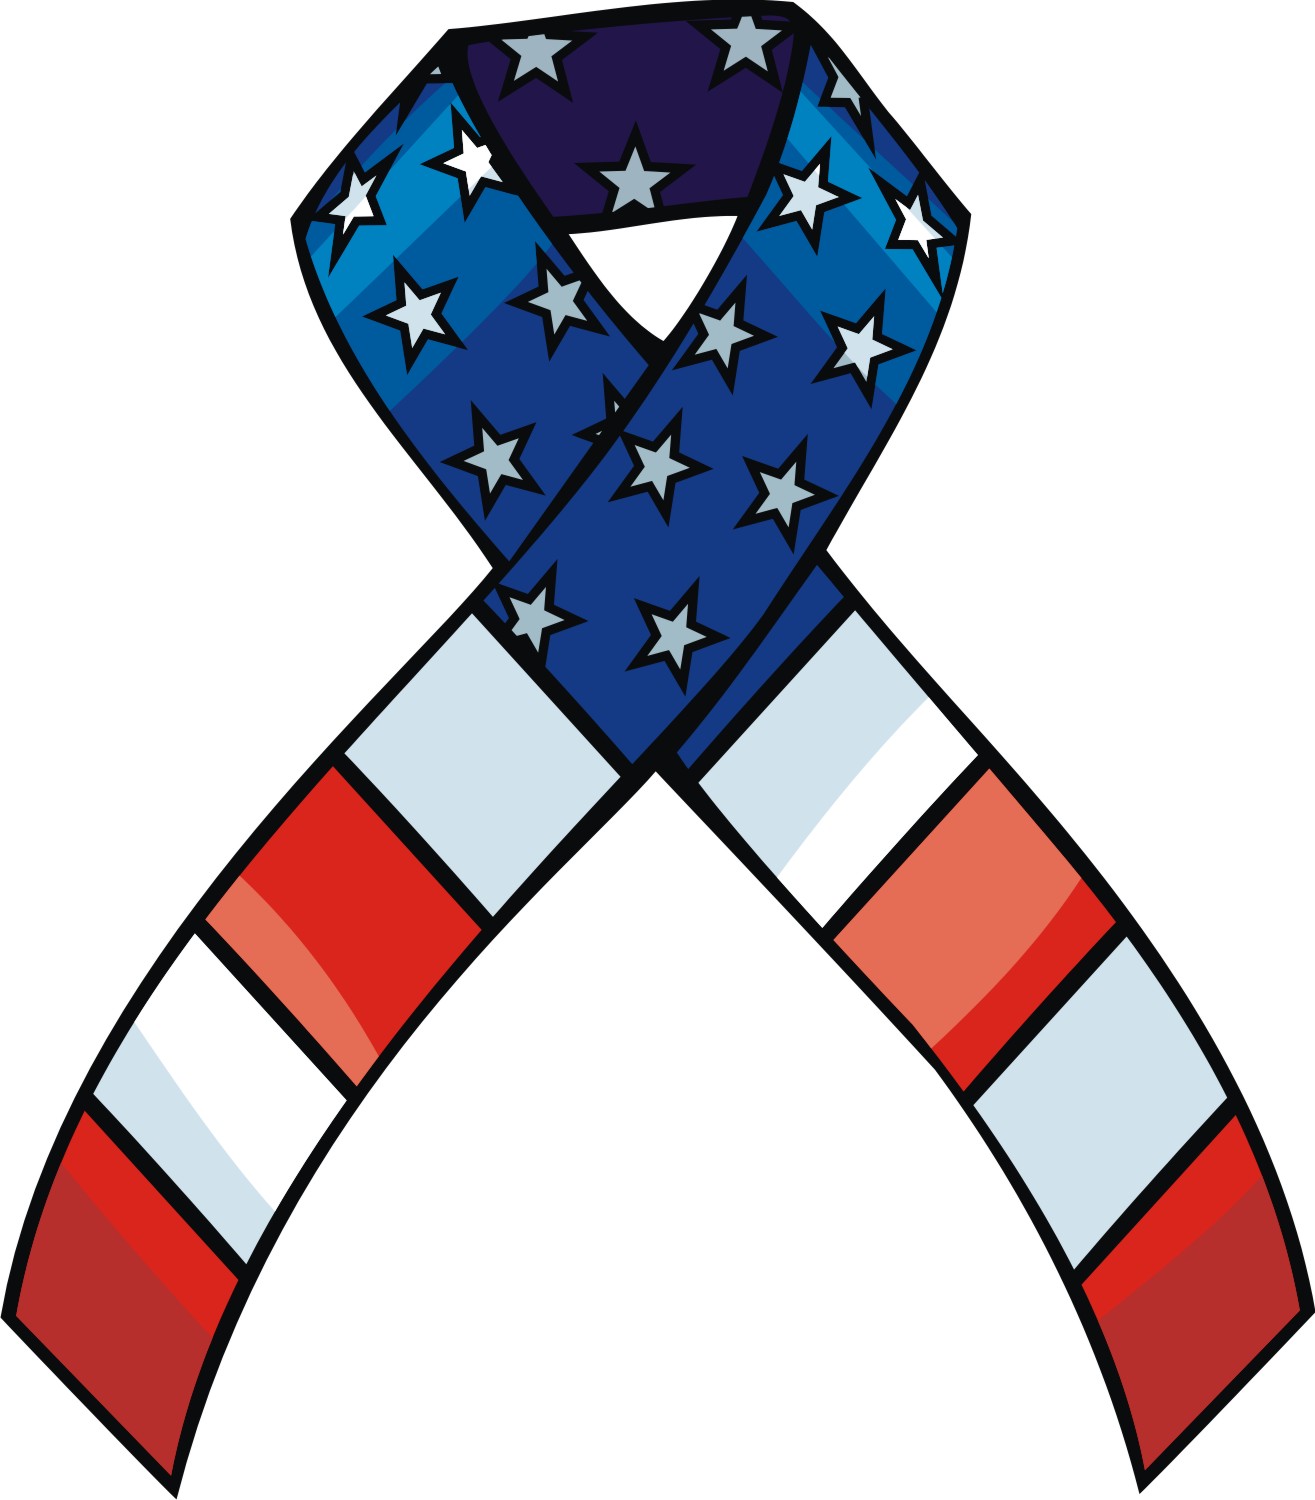 14 Memorial Day Clipart Free Cliparts That You Can Download To You